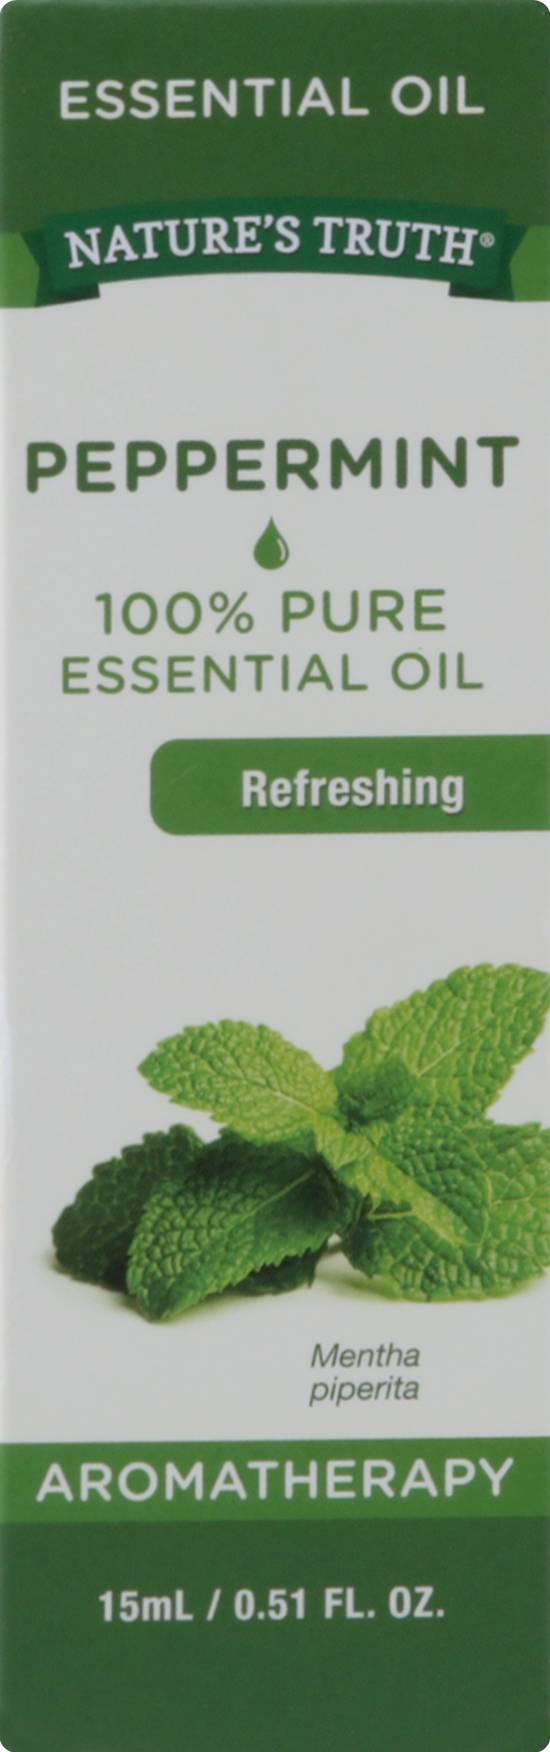 Nature's Truth 100% Pure Peppermint Essential Oil